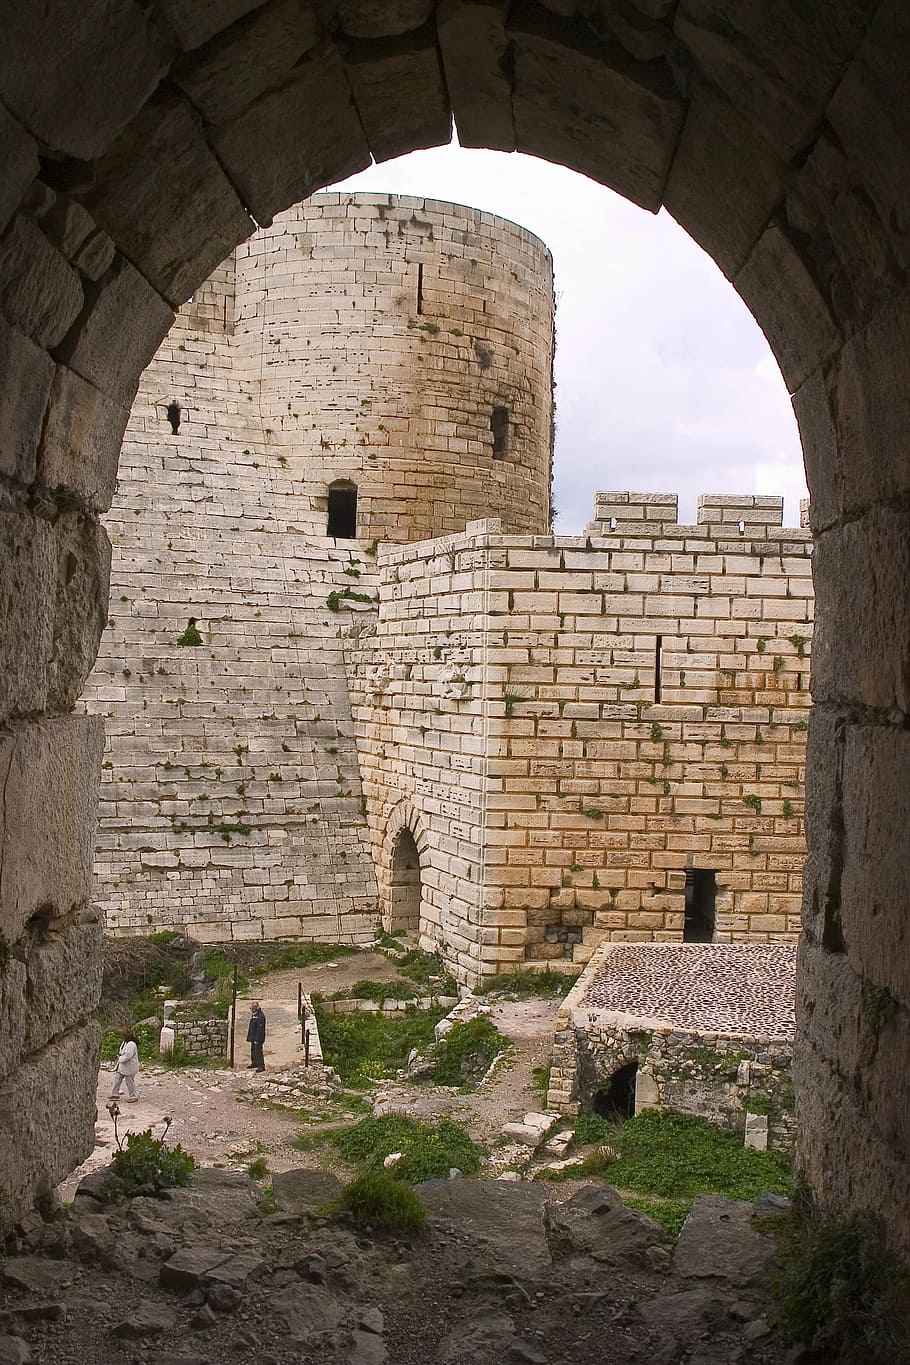 krak of chevaliers, crusader, syria, ancient cities, architecture, ancient, history, arch, stone Material, old